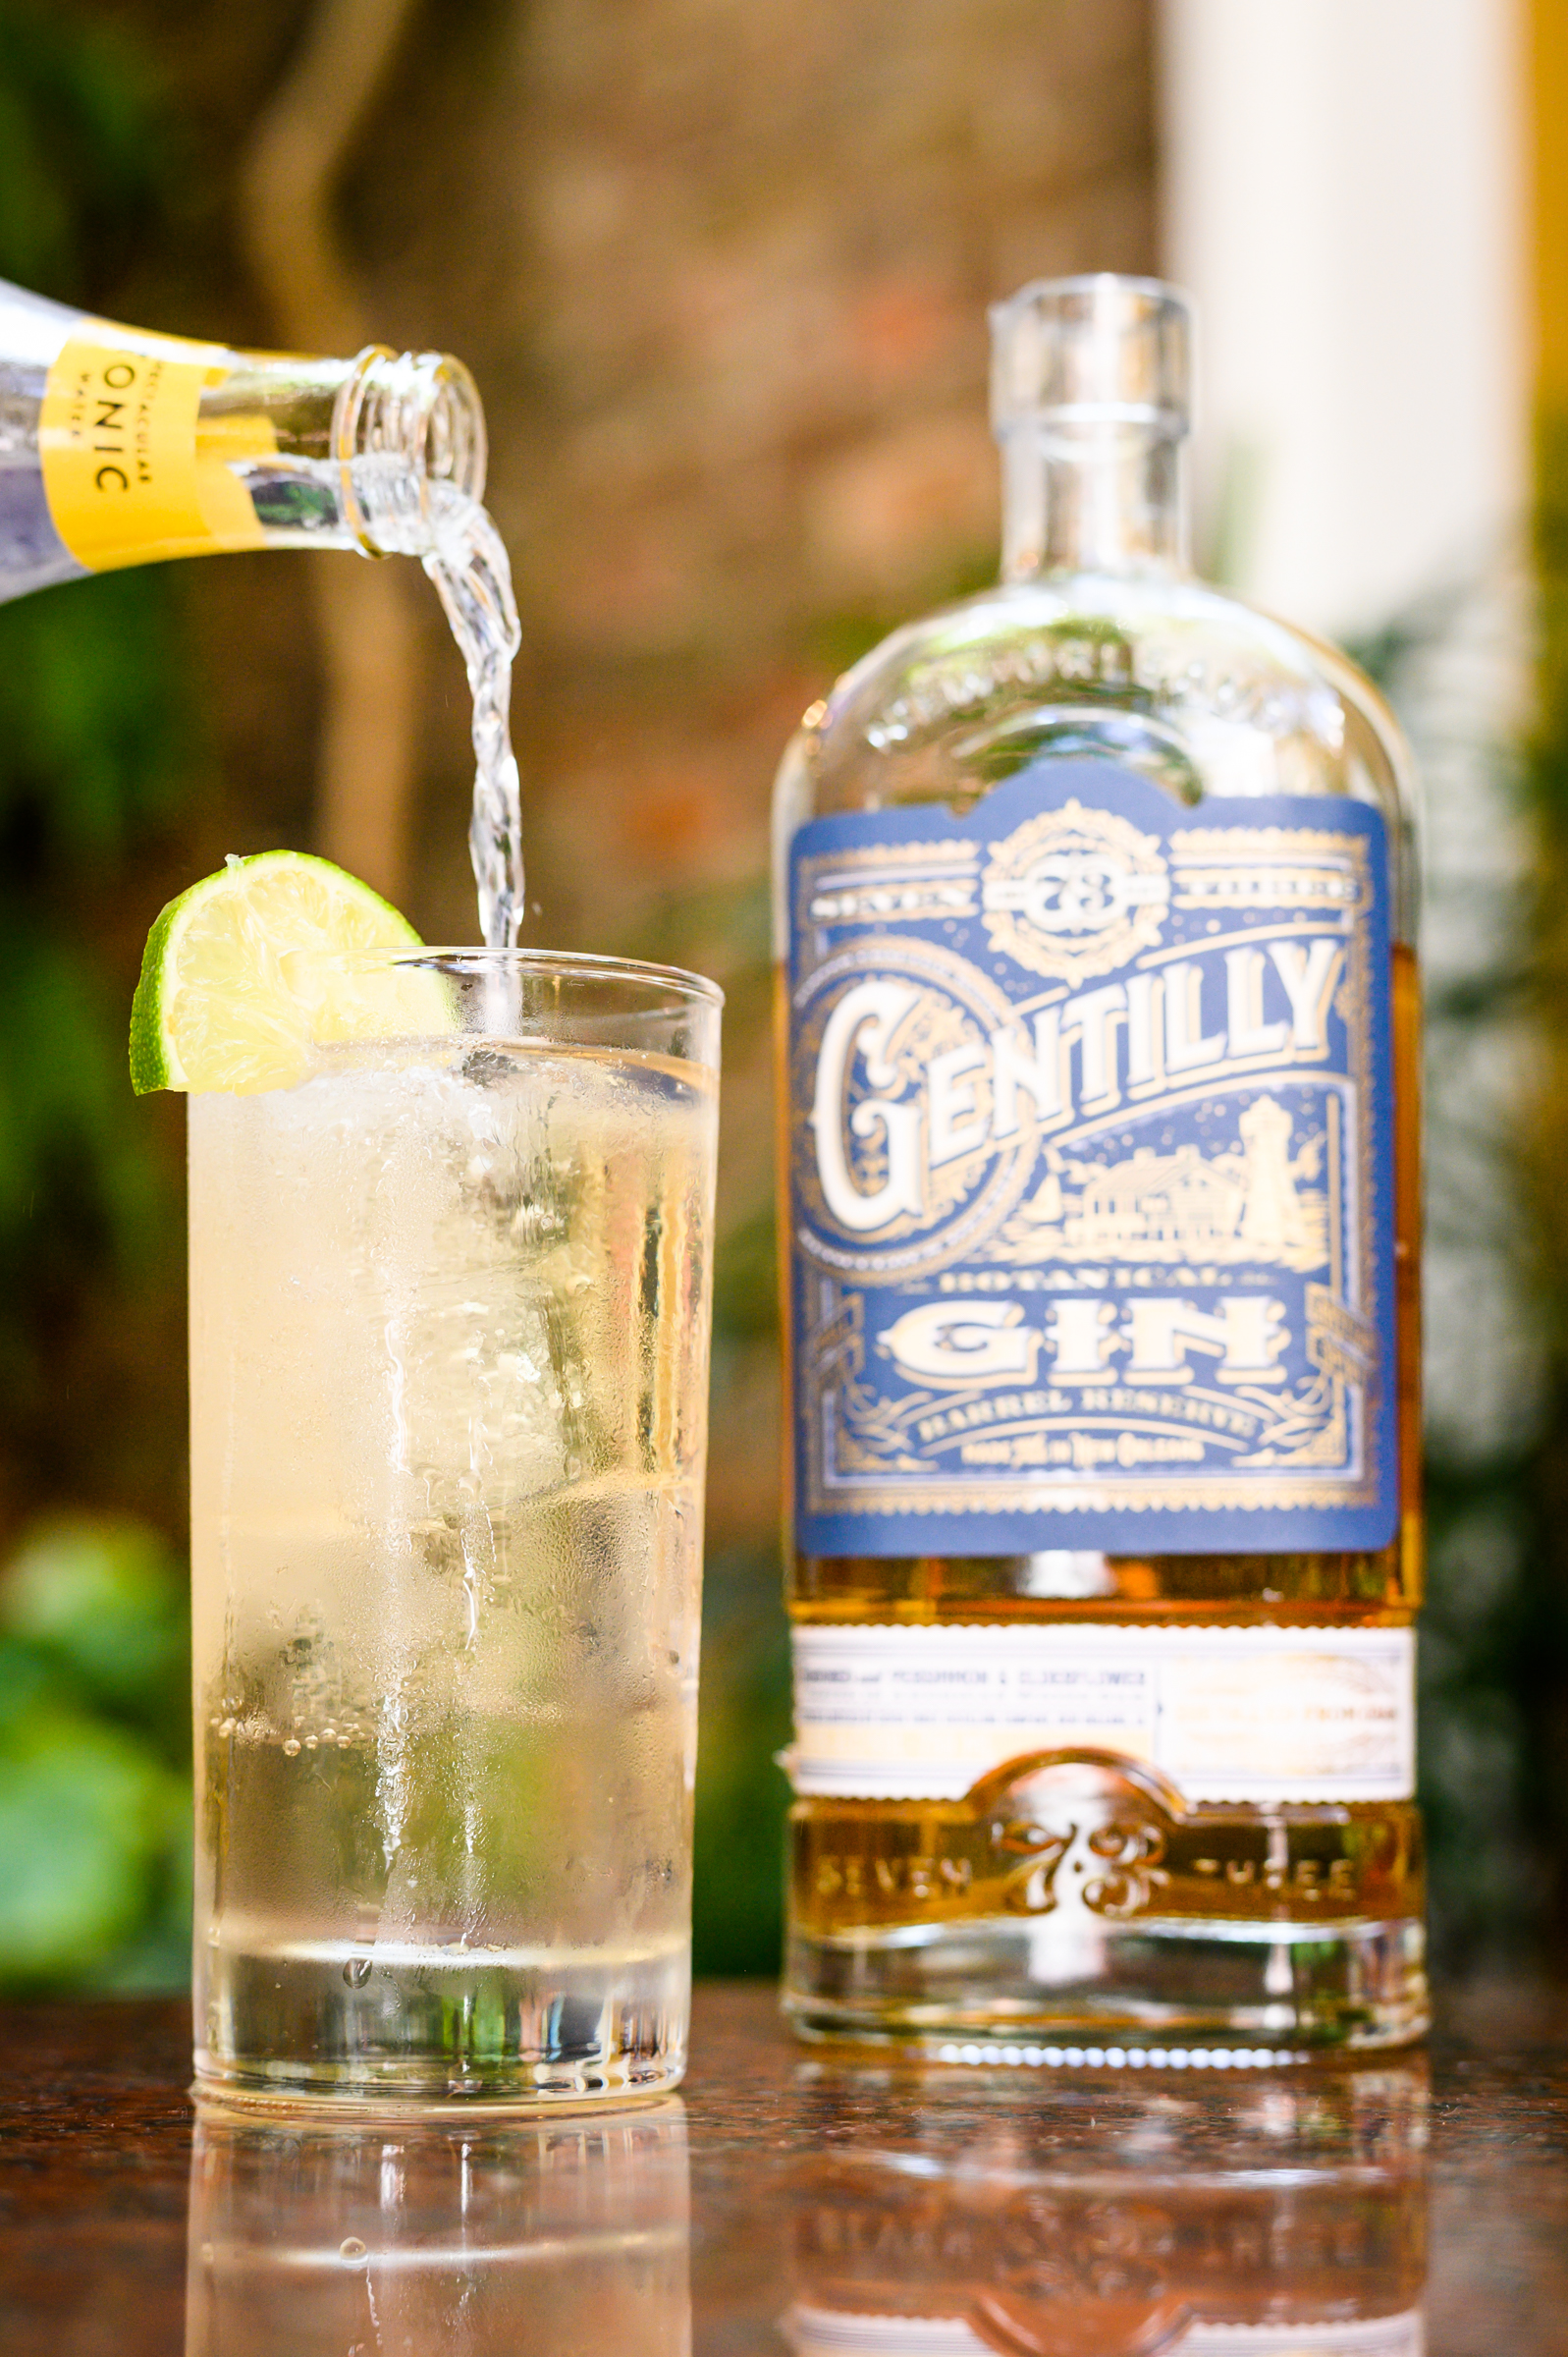 Q Mixers tonic mixed with Gentilly Gin